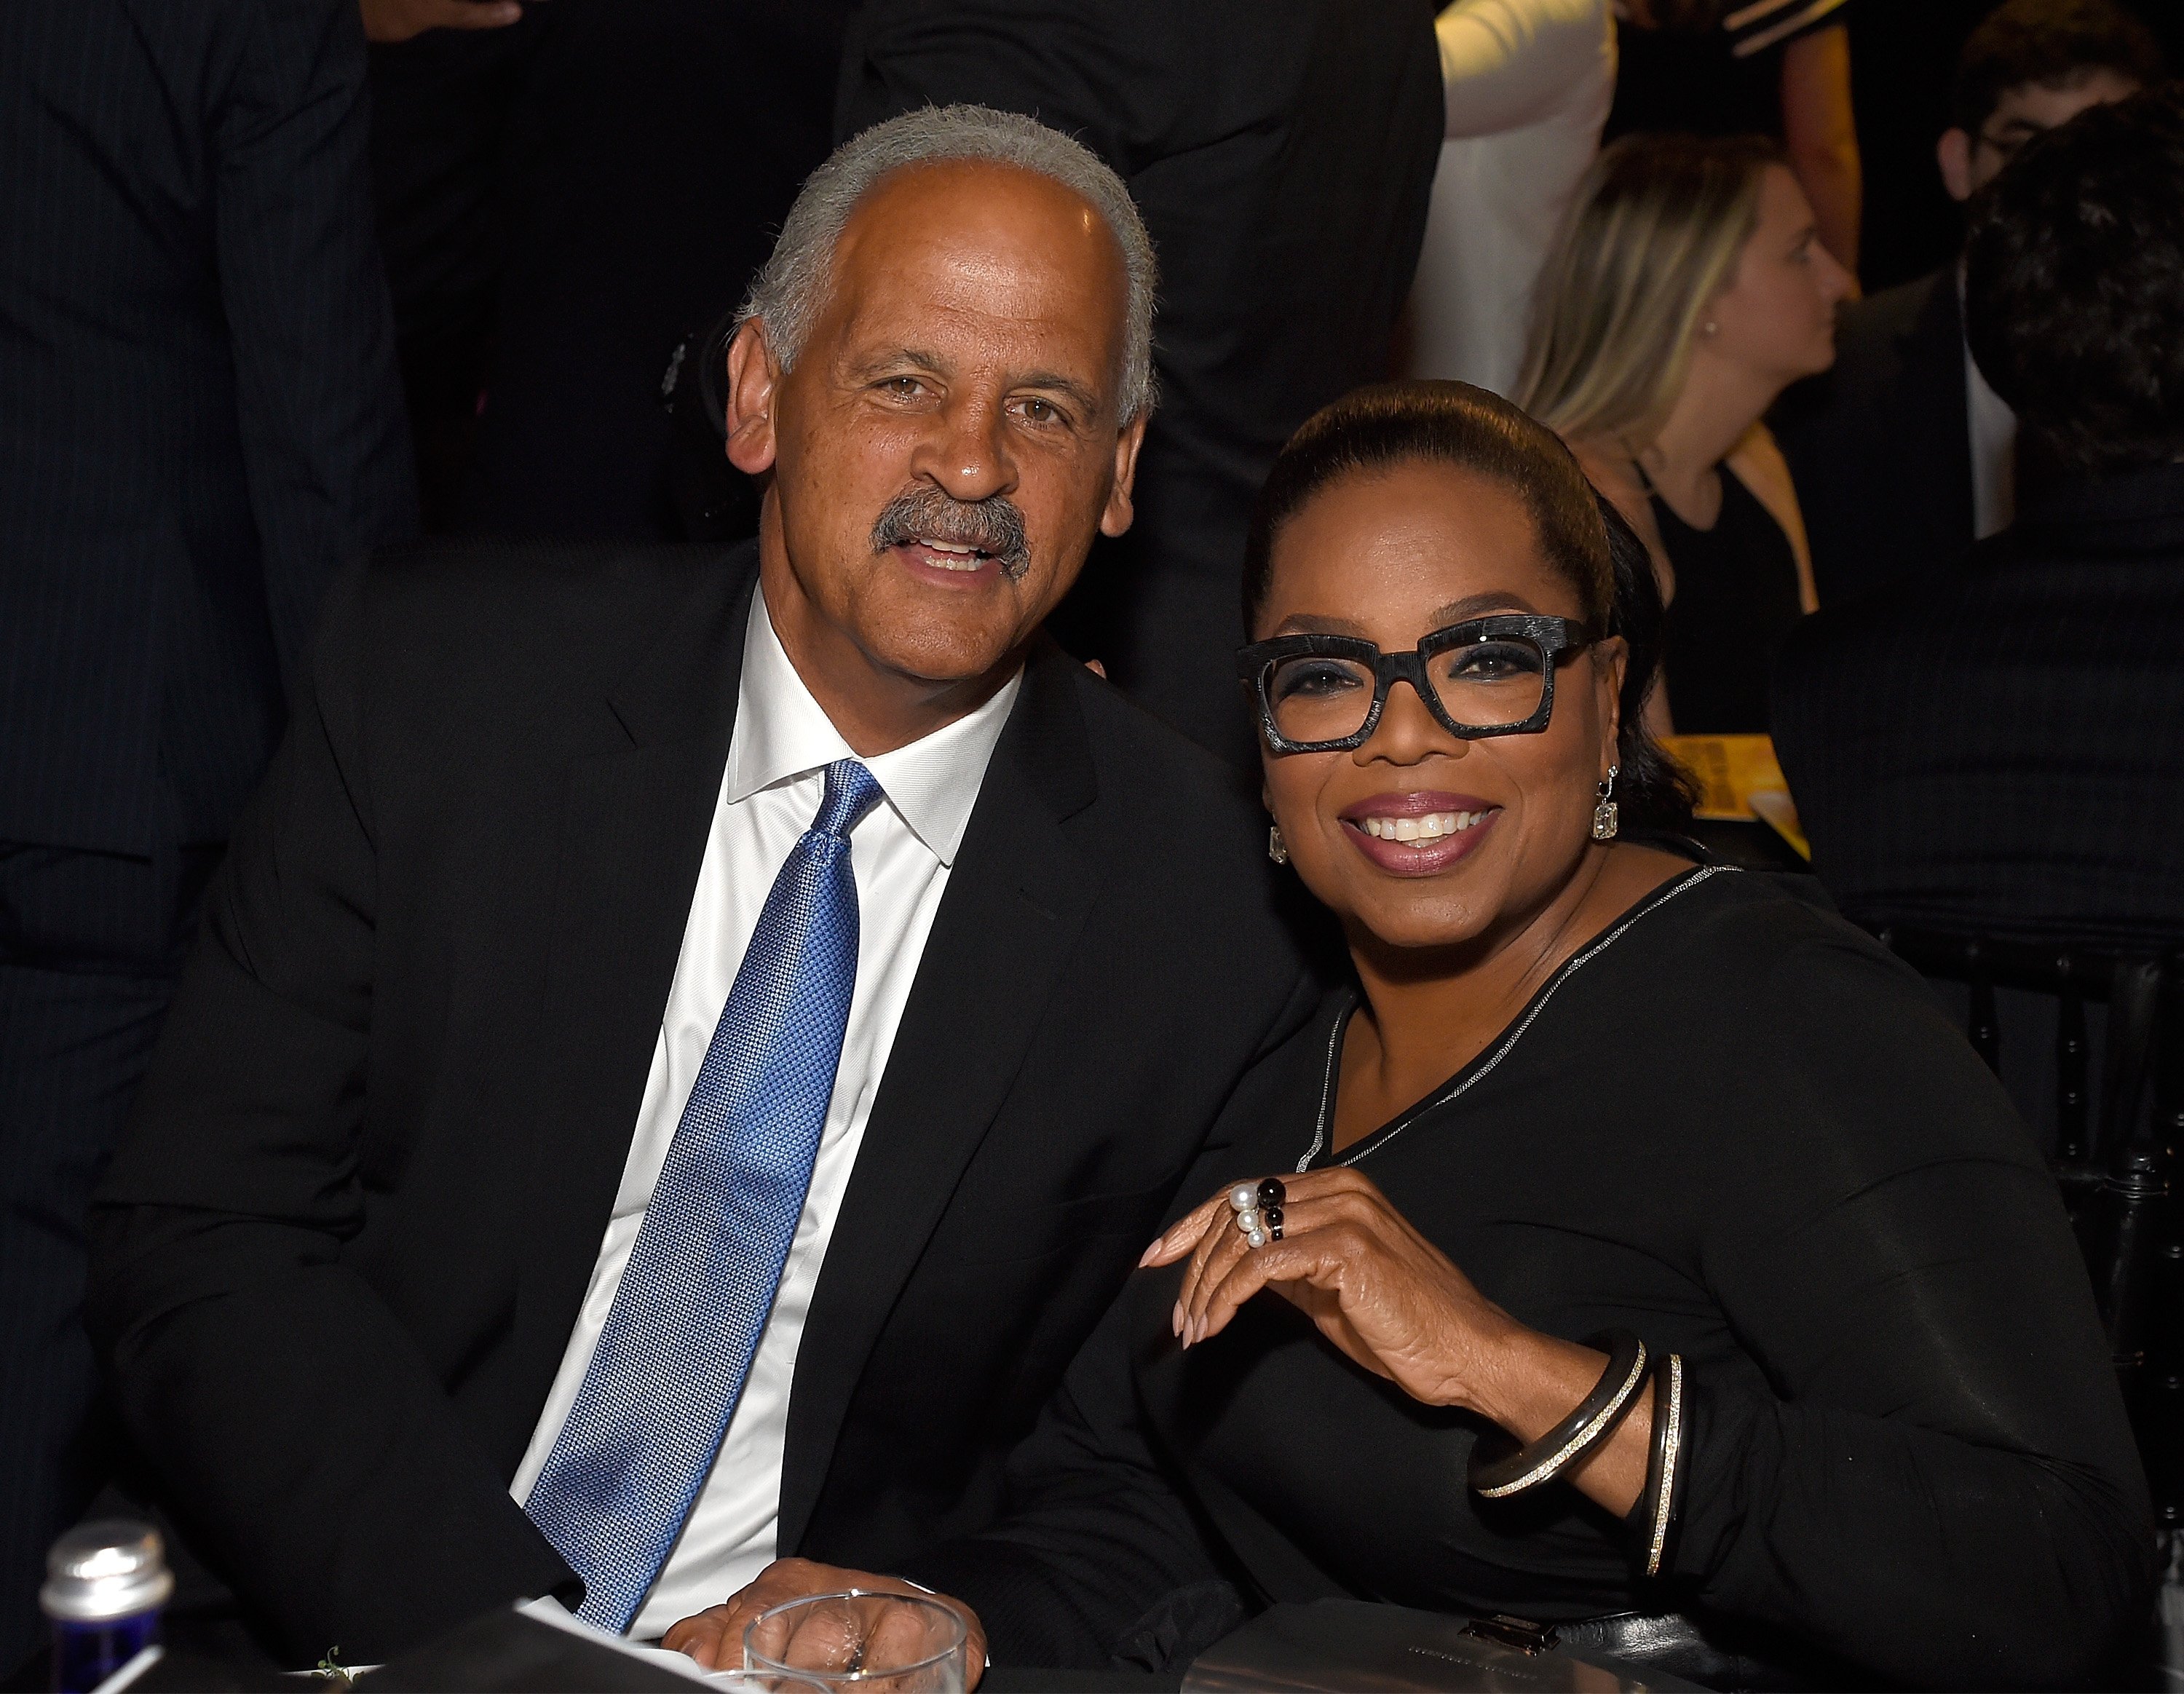 Stedman Graham and Oprah Winfrey attend The Robin Hood Foundation's 2018 benefit at Jacob Javitz Center on May 14, 2018 | Source: Getty Images